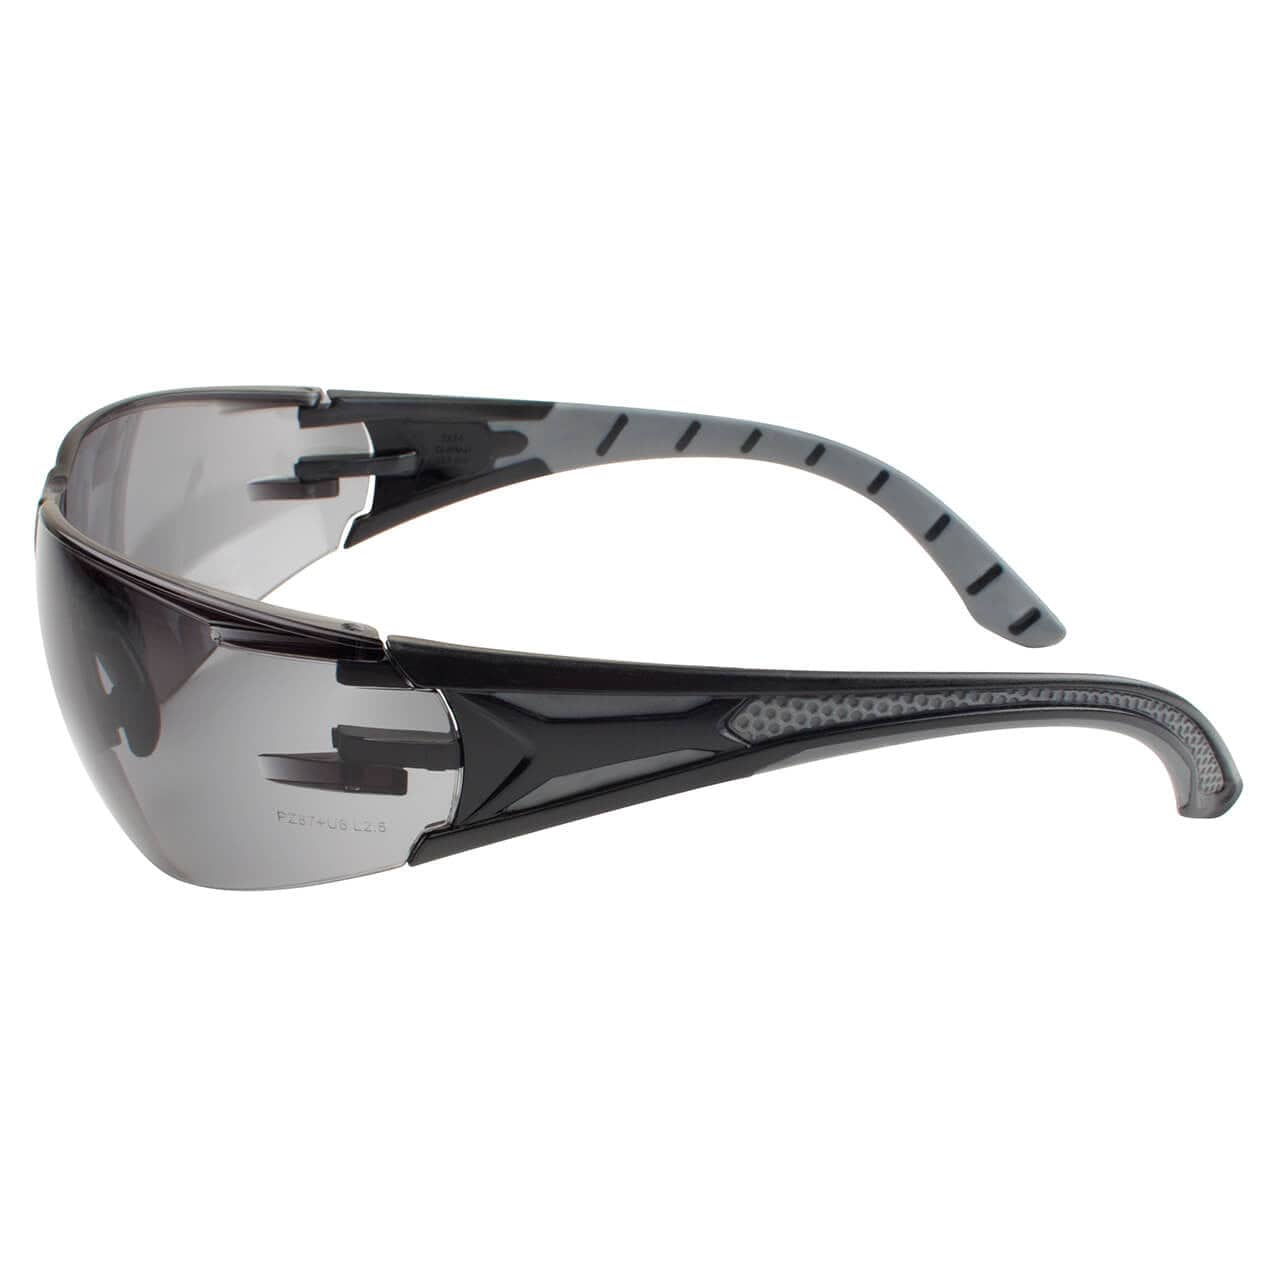 Metel M50 Safety Glasses with Gray Anti-Fog Lenses Side View